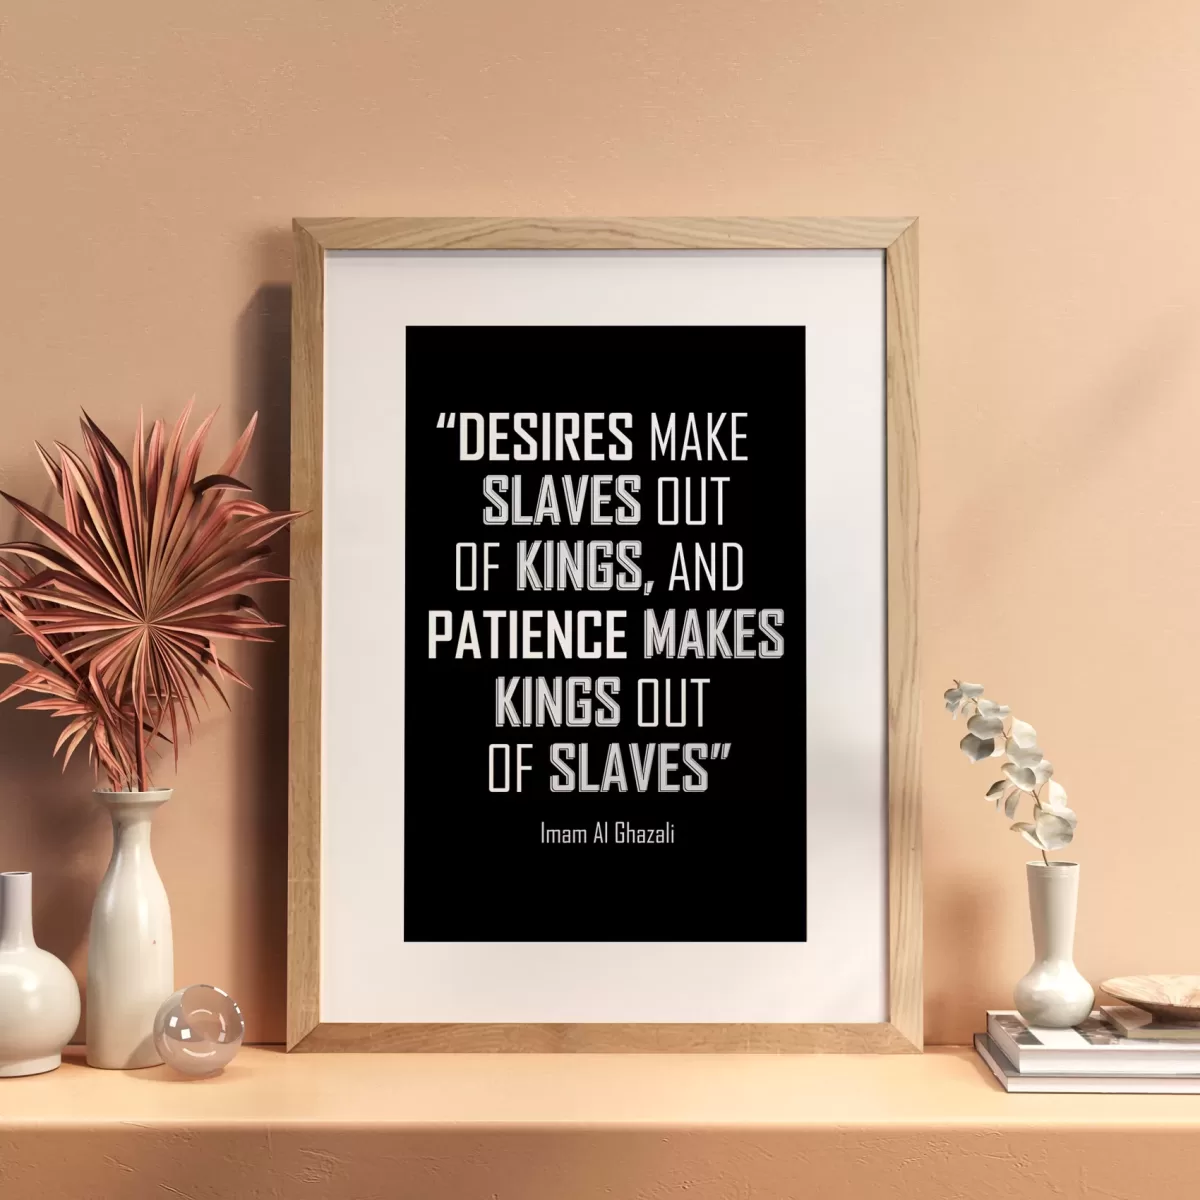 Patience makes kings out of slaves jpg The Sunnah Store